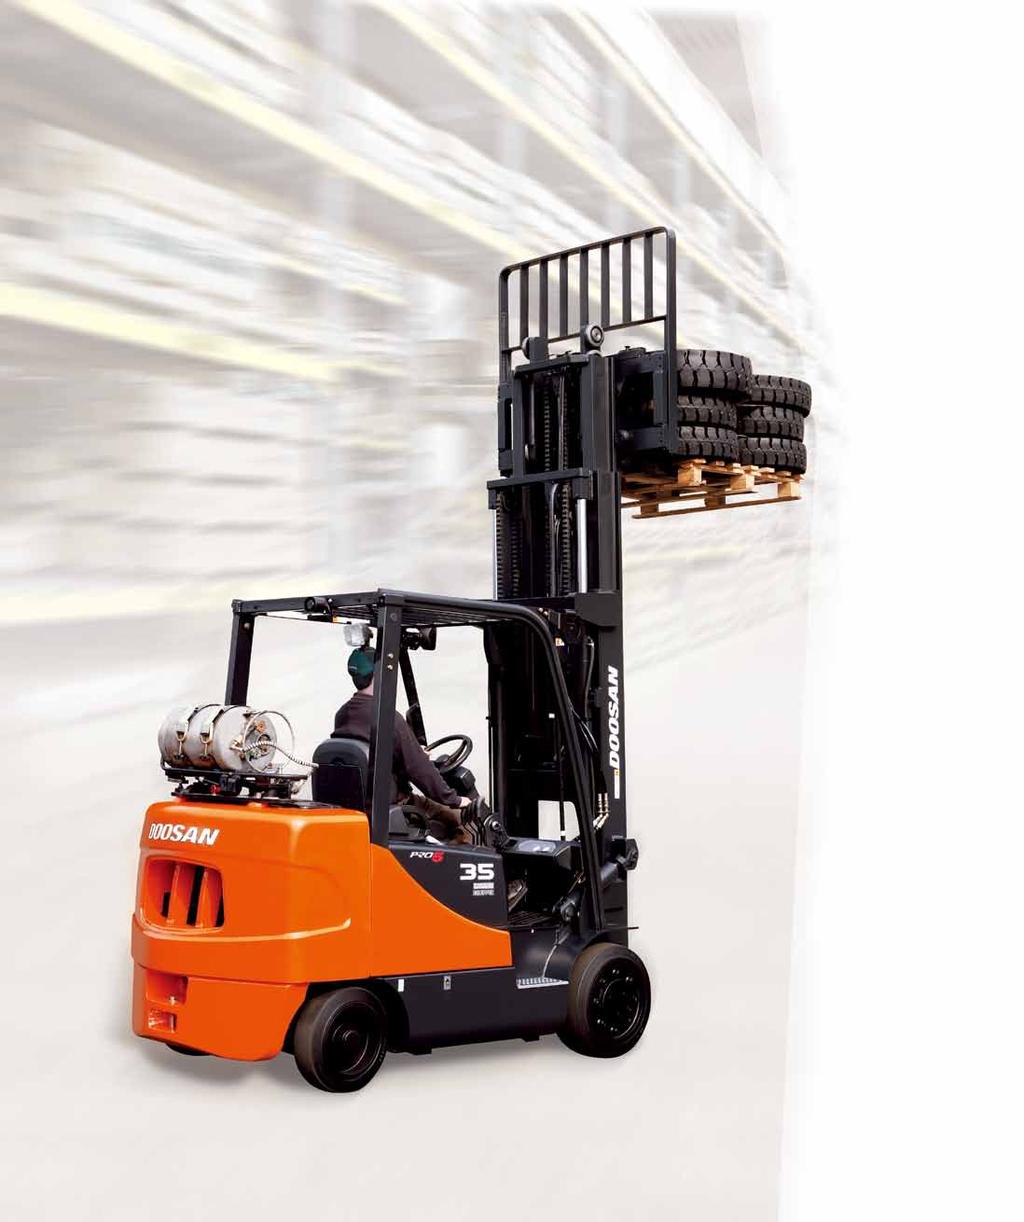 Proven Quality, Responsive Service and A Reliable Partner... The aftersales service of Doosan forklifts is available from your authorized local dealers backed by Doosan s own customer service center.